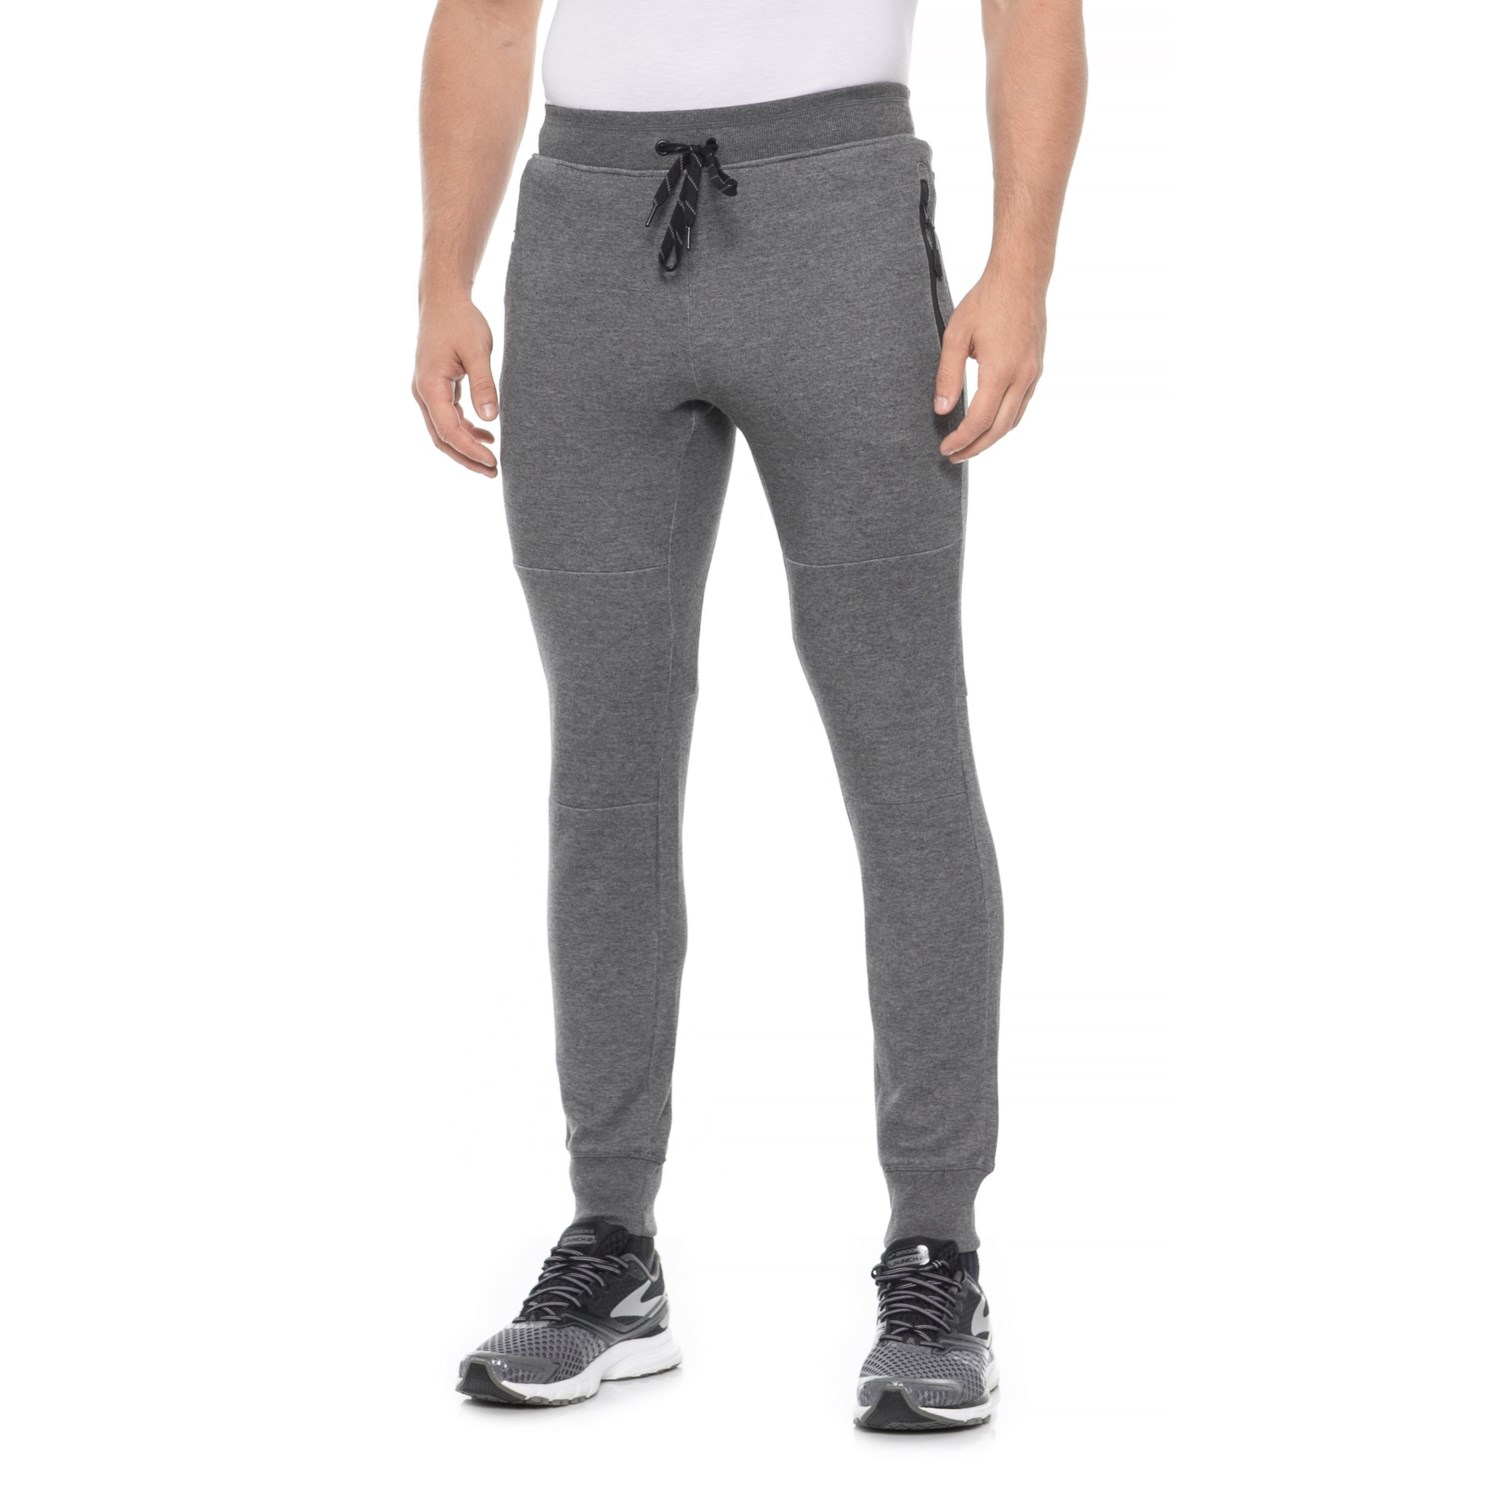 Kyodan Double-Knit Joggers (For Men) - Save 75%